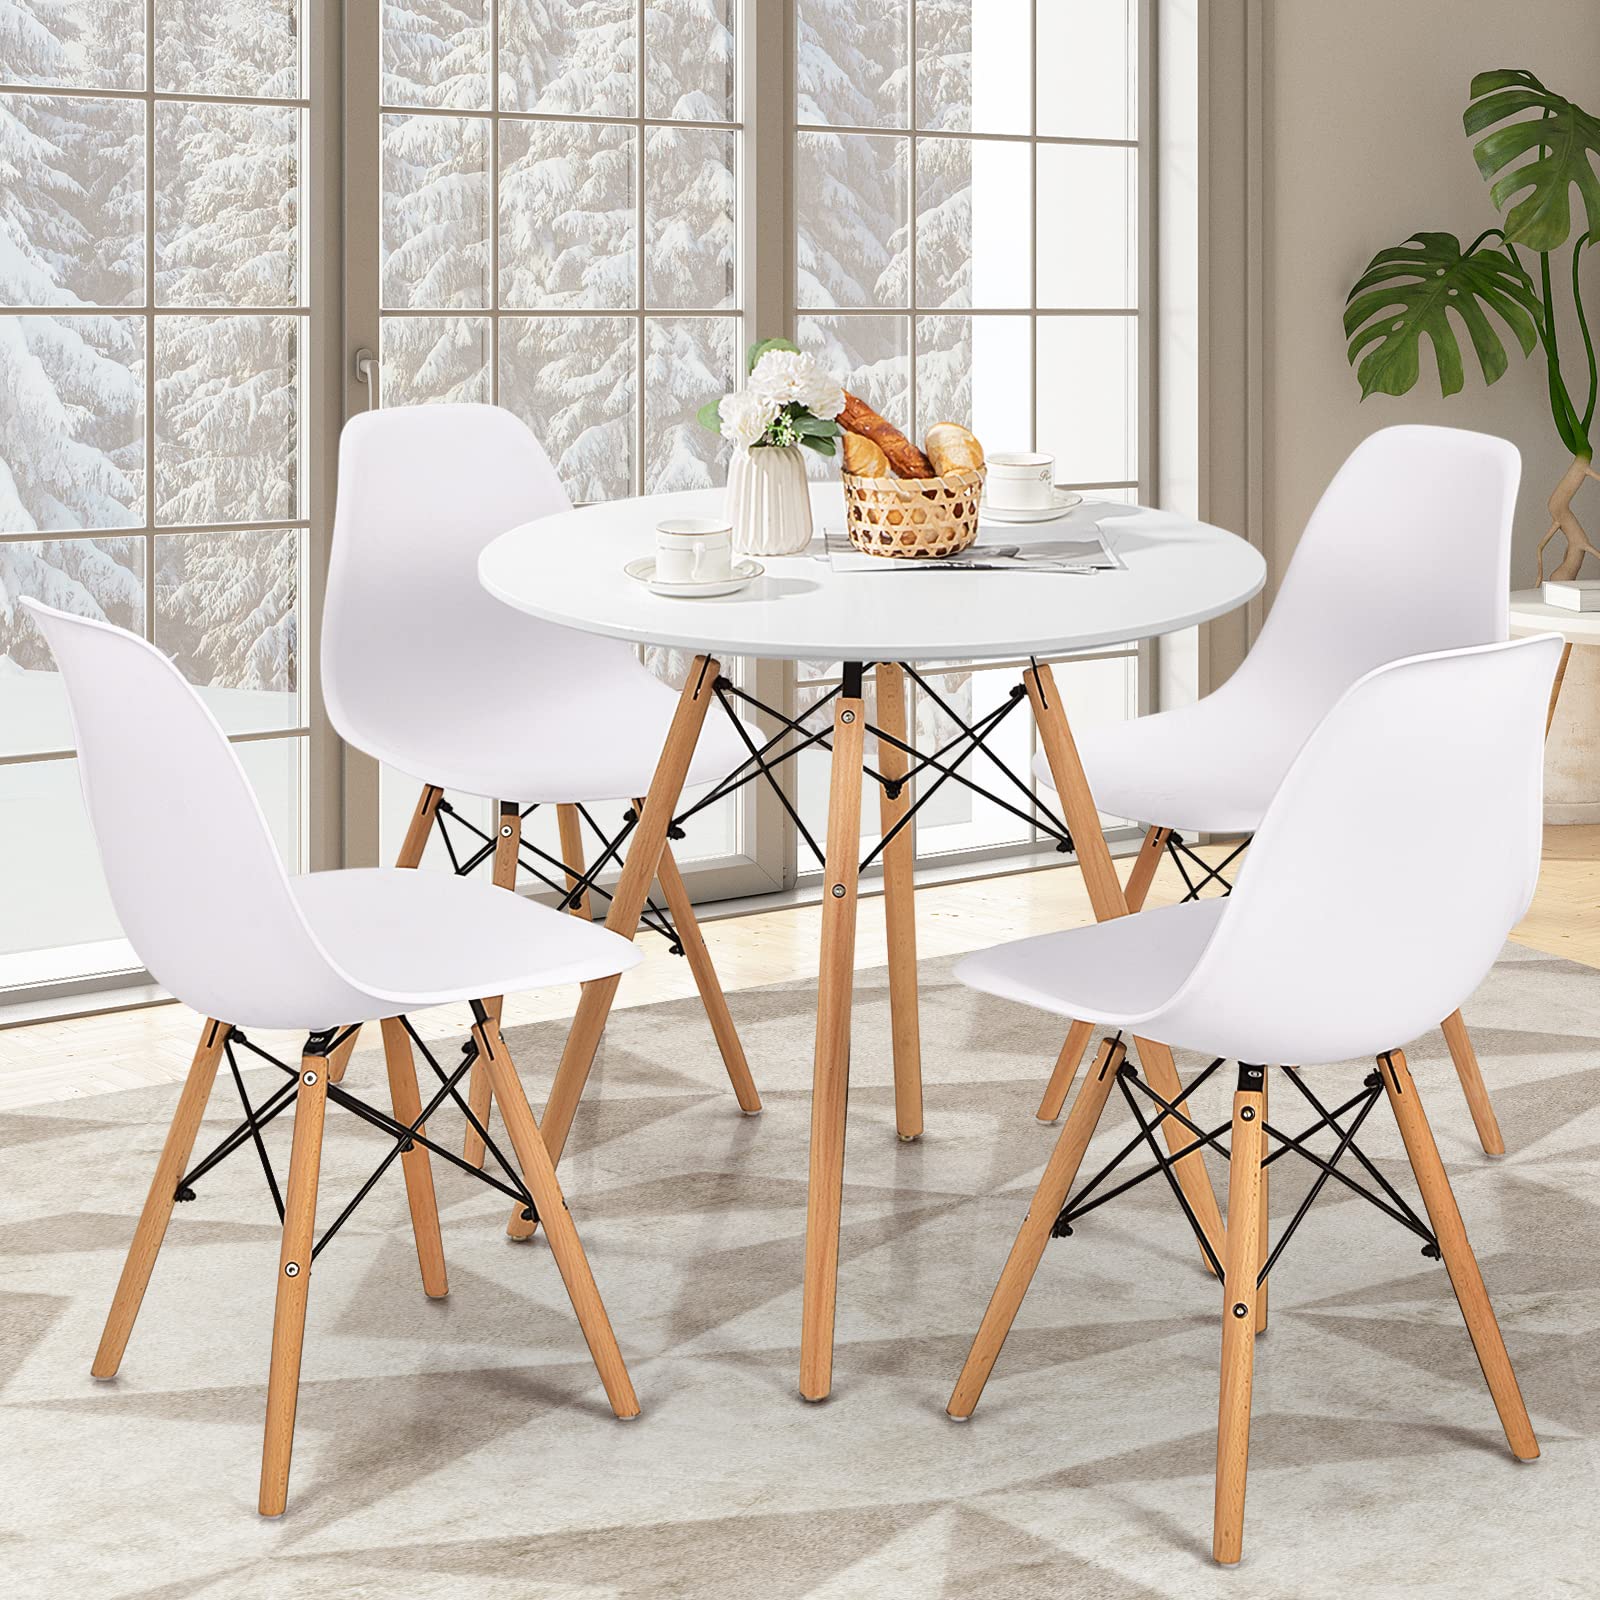 Giantex Dining Table, Round Dining Room Table with Solid Beech Wood Legs